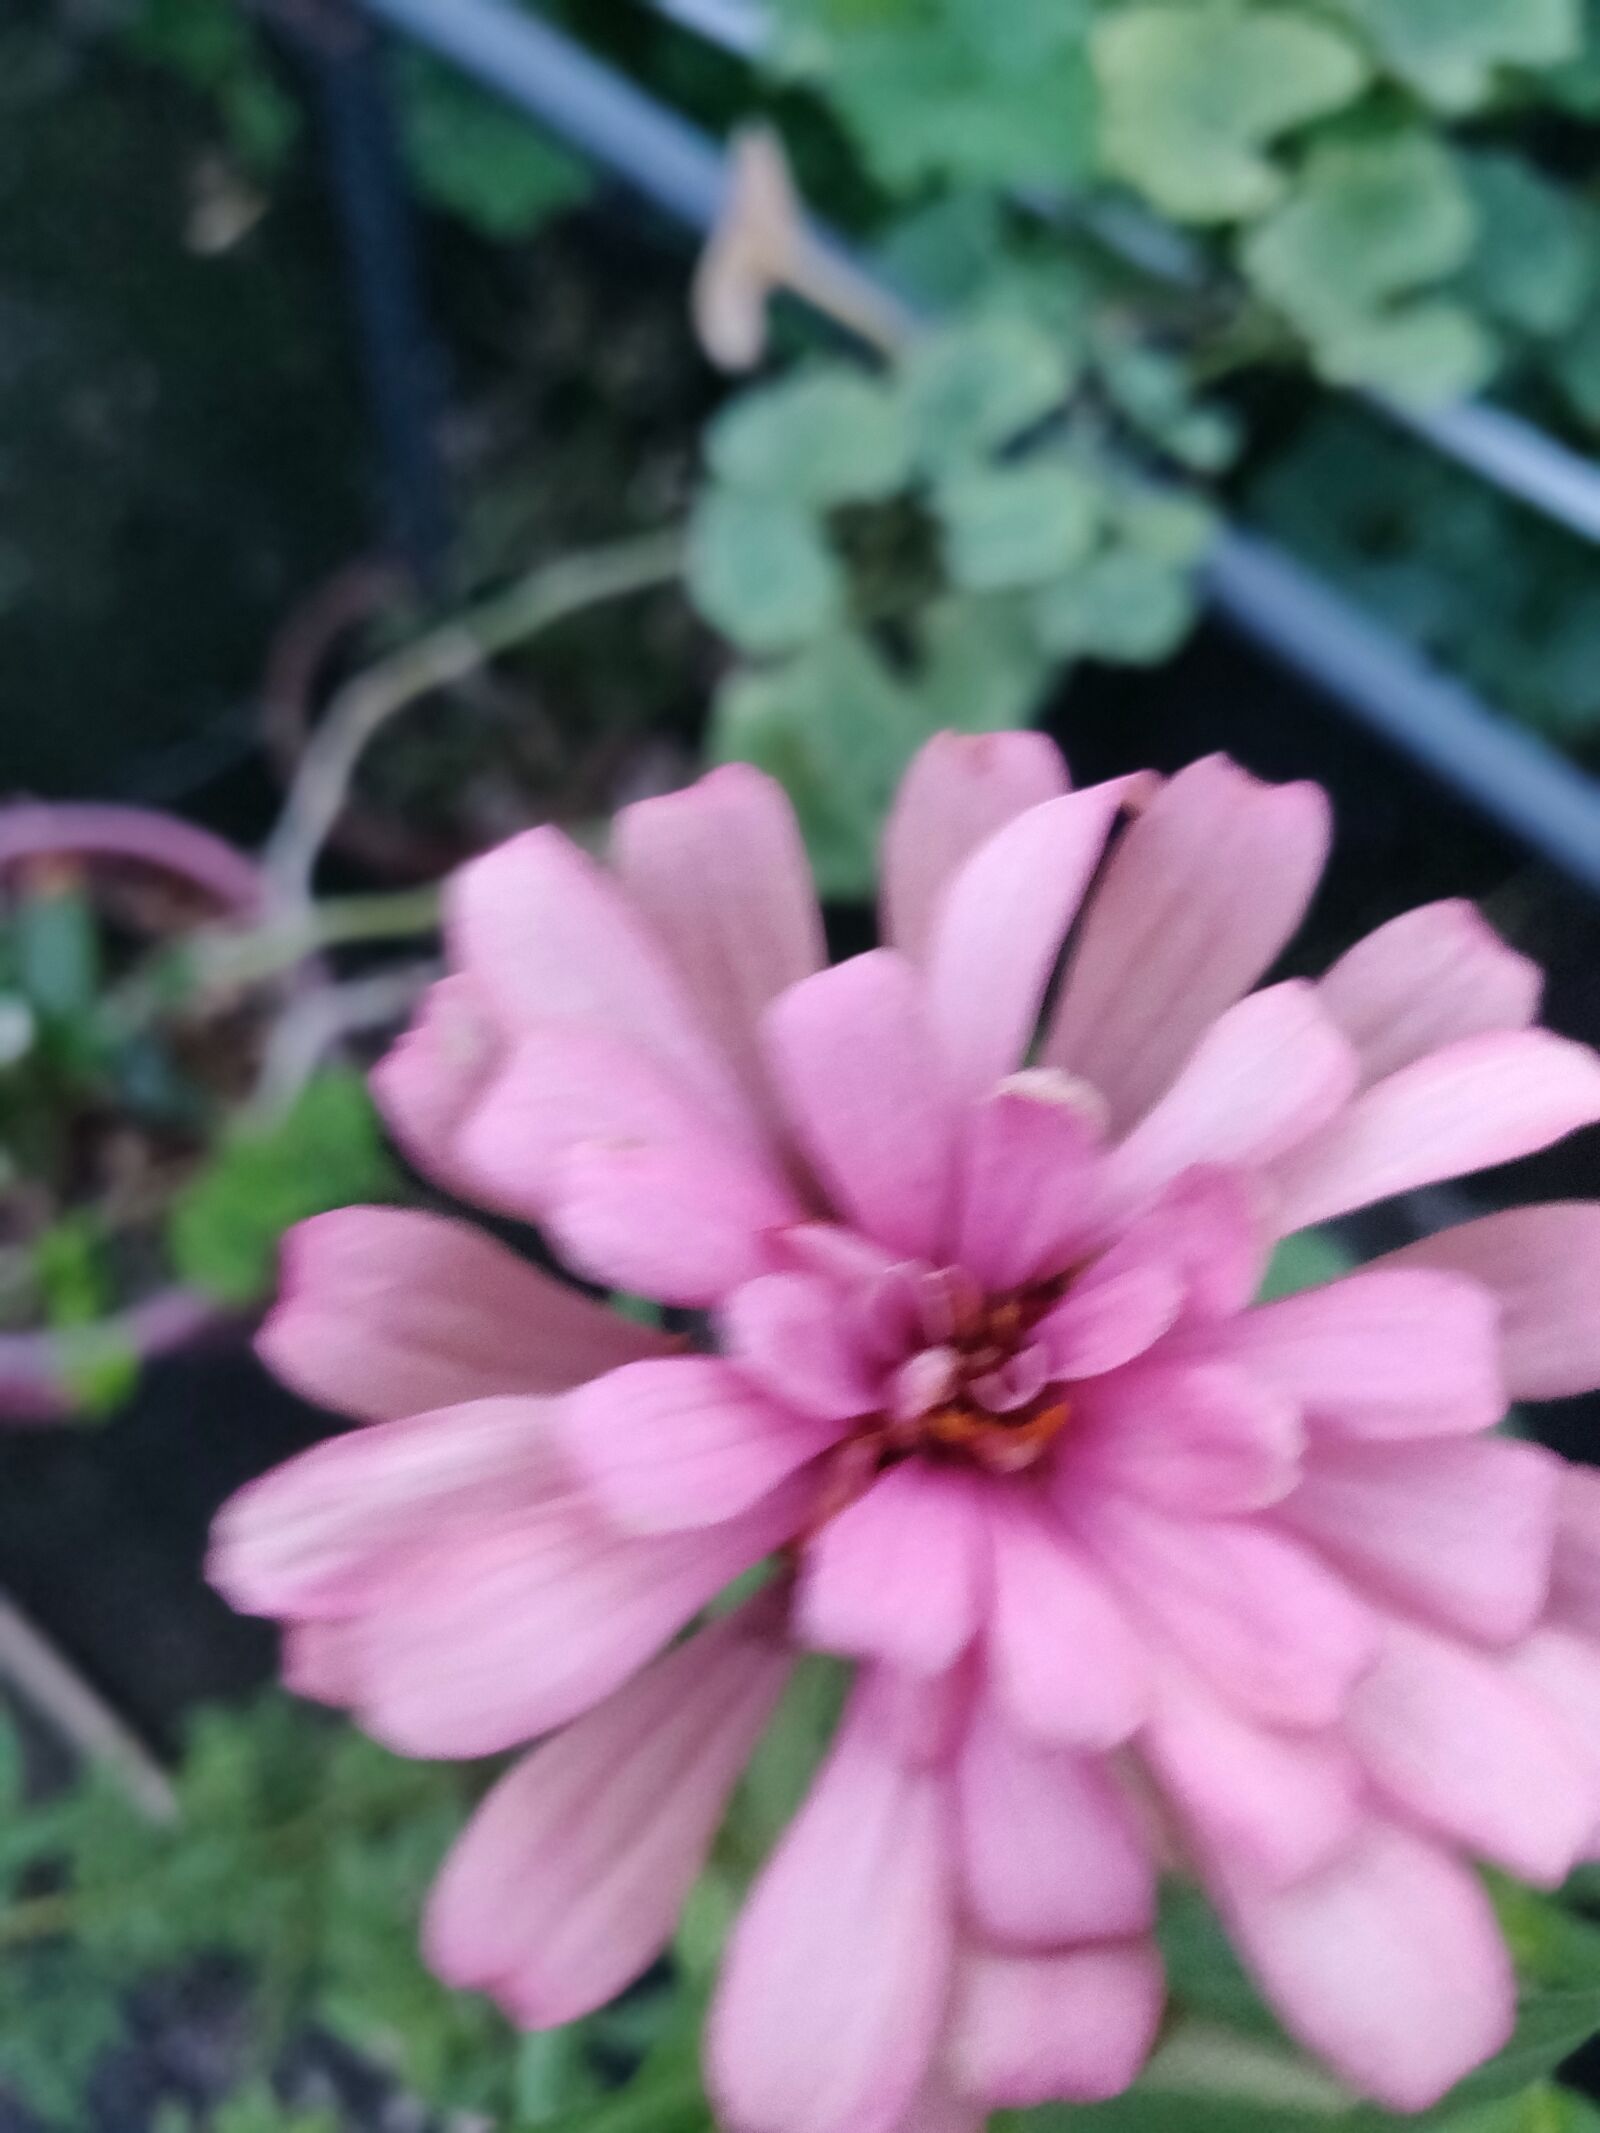 OnePlus A6010 sample photo. Flower, nature, pink photography